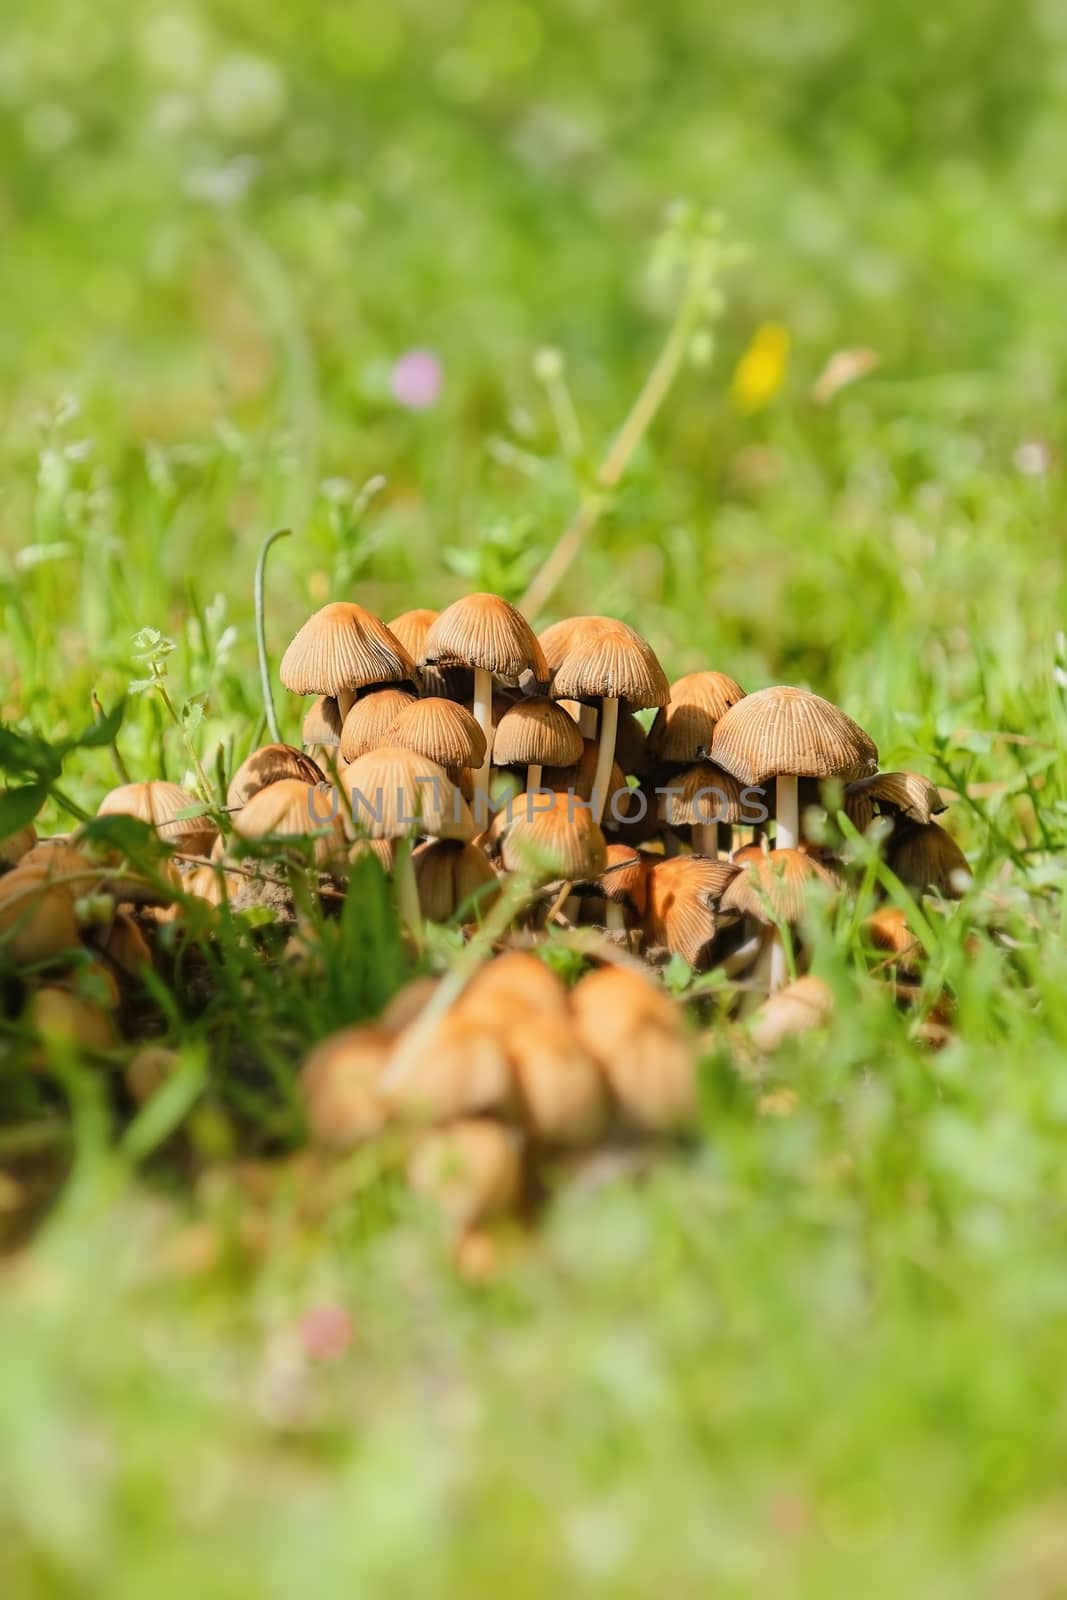 Mushrooms in the Grass on a lawn